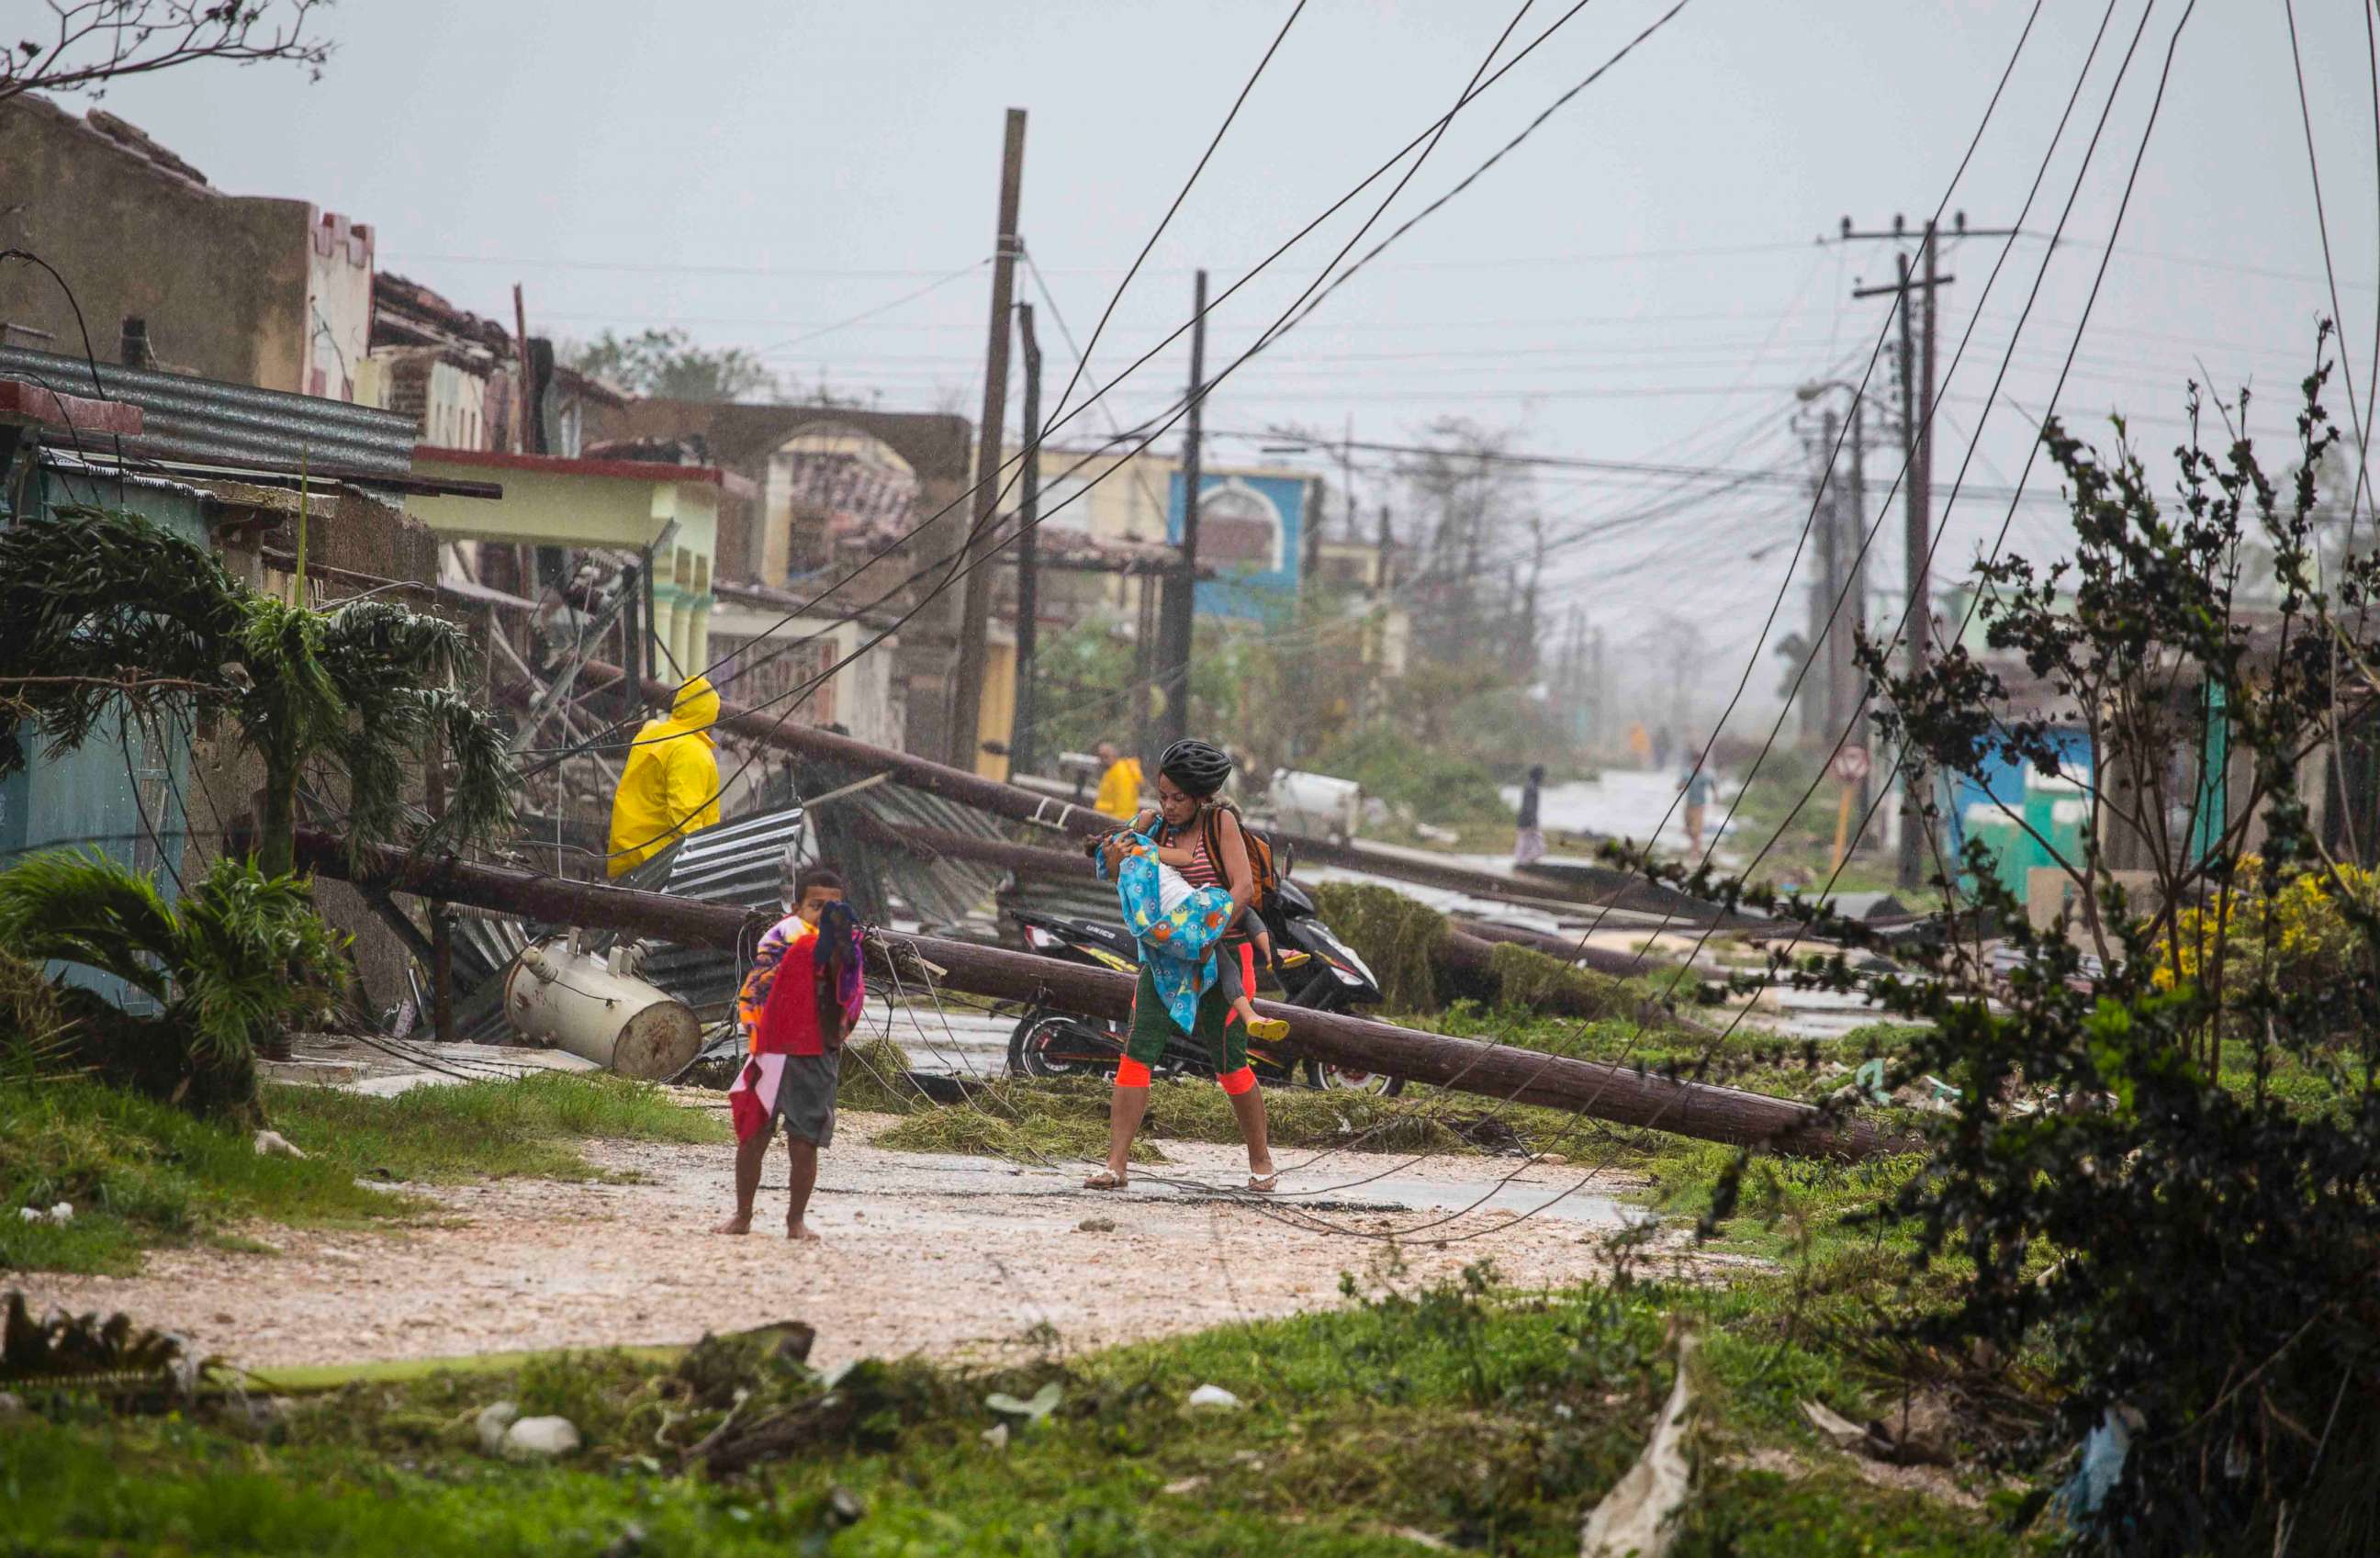 PHOTO: Residents walk near downed power lines felled by Hurricane Irma, in Caibarien, Cuba, Sept. 9, 2017.